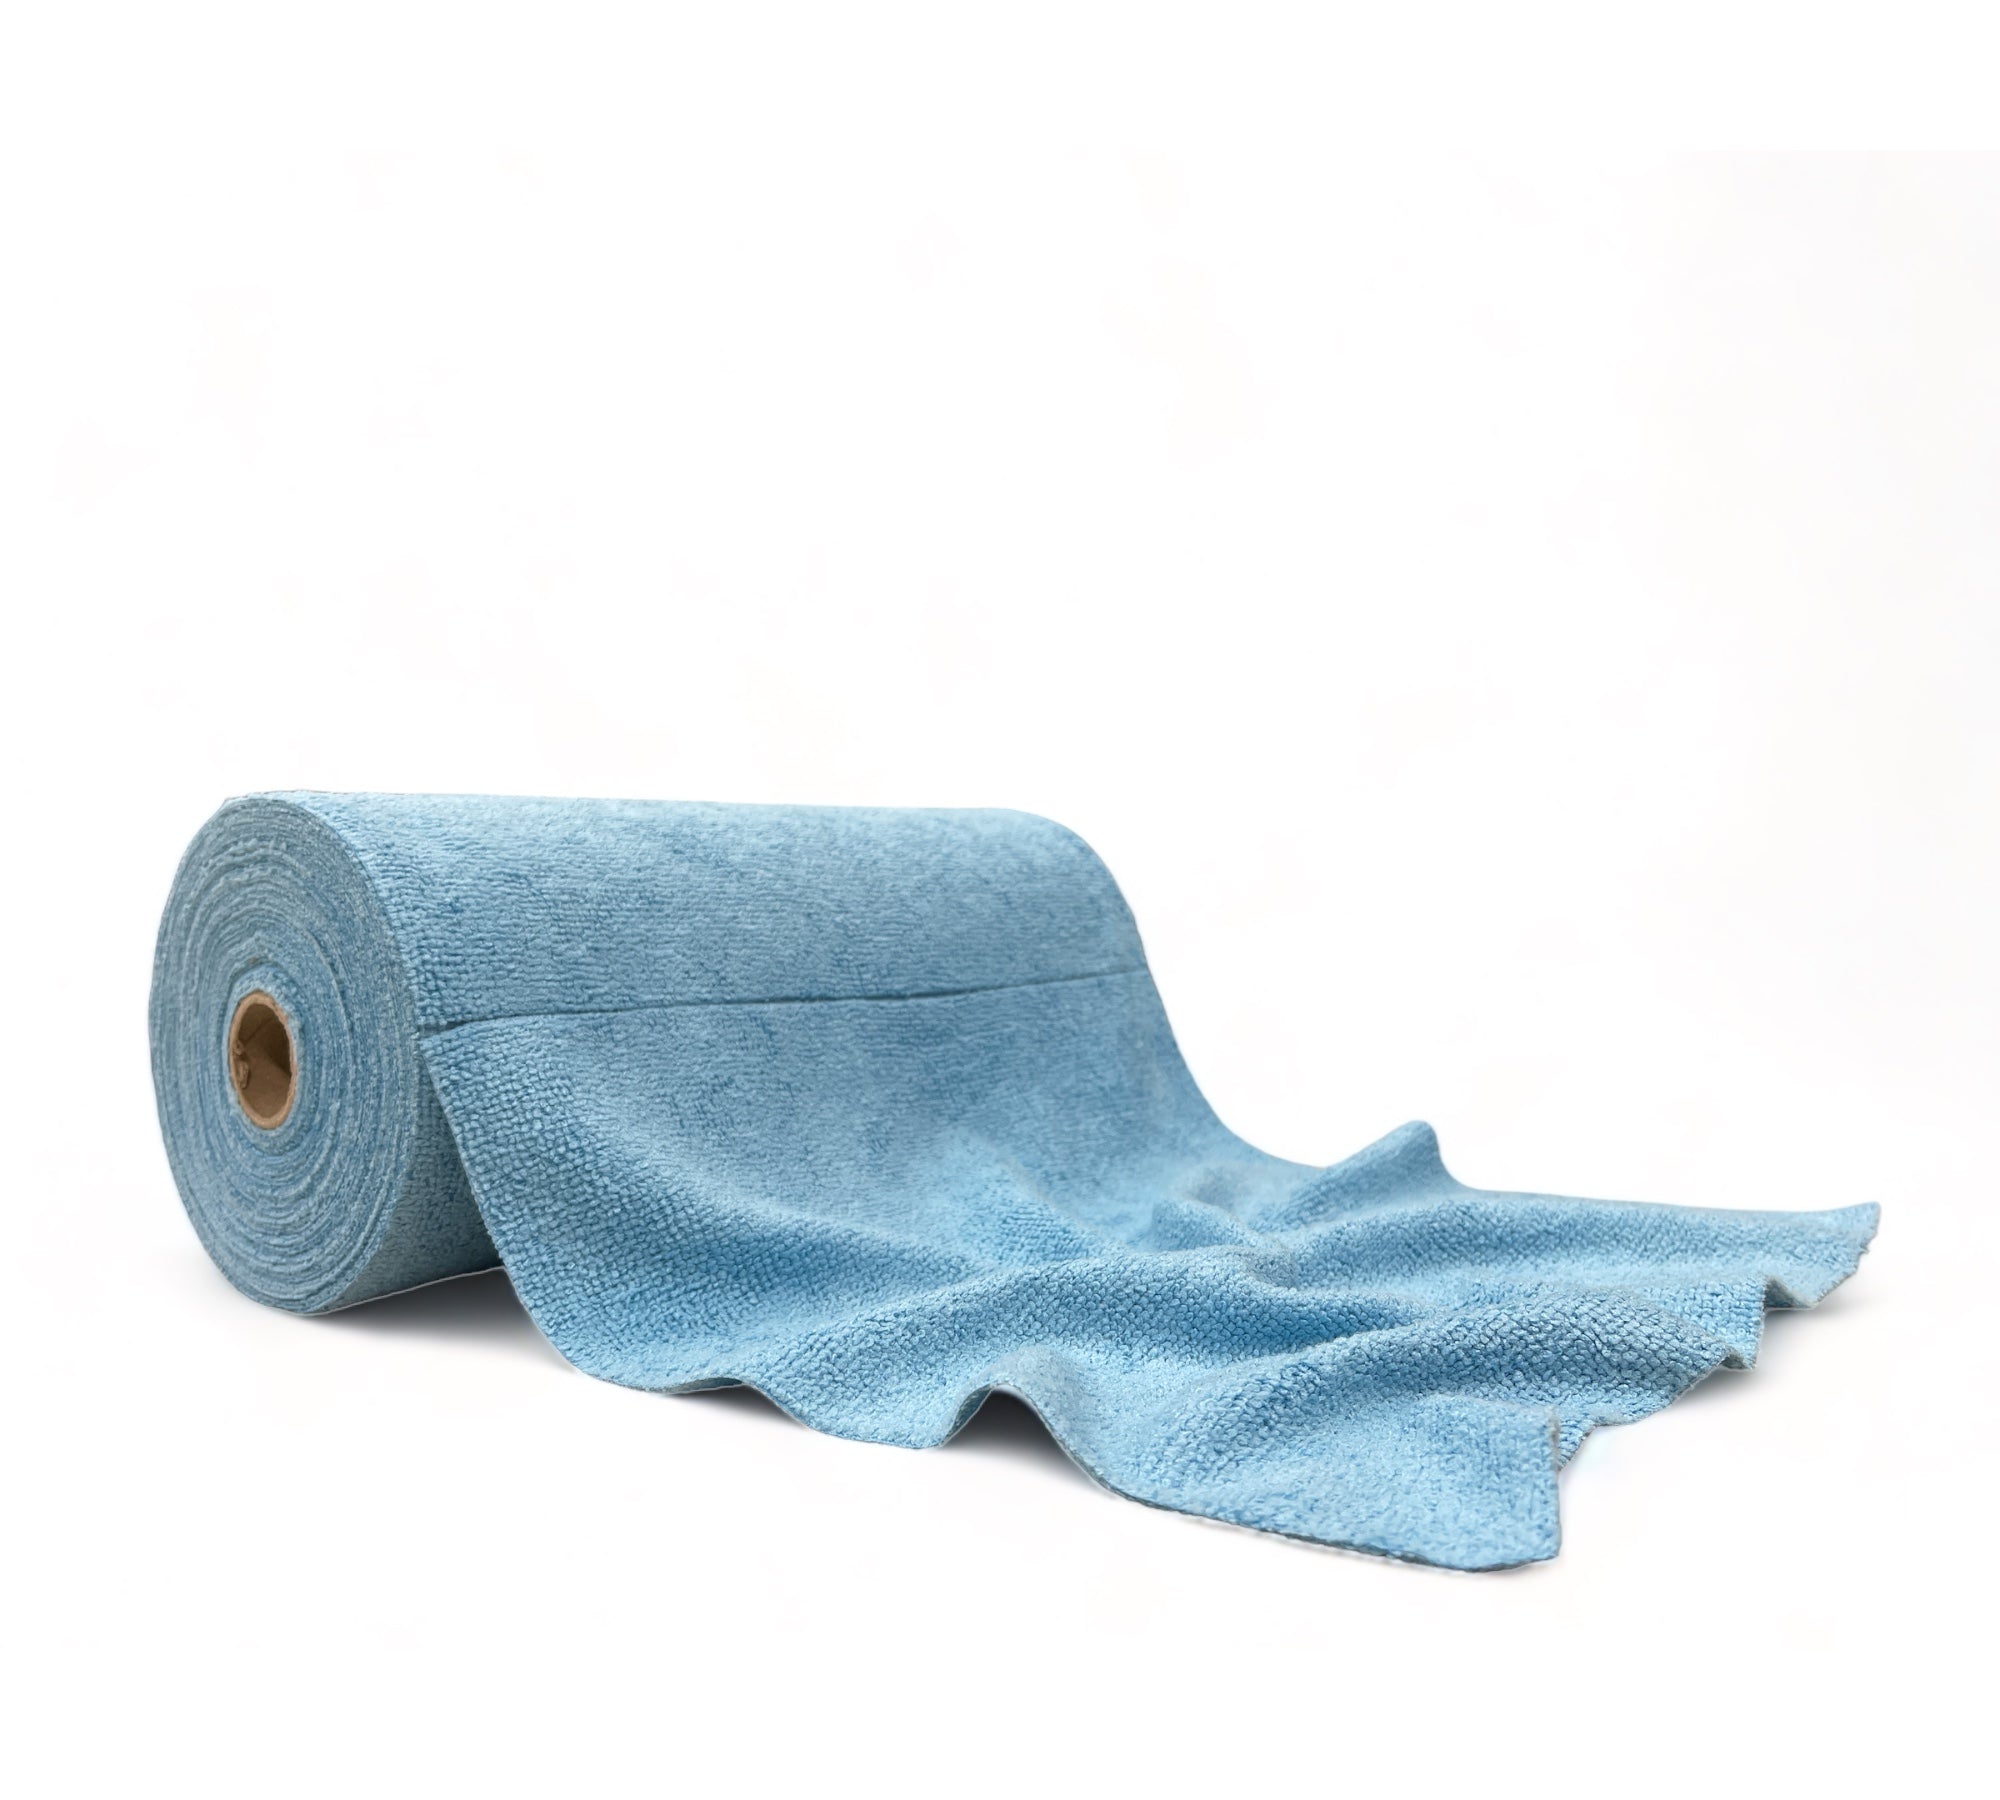 Roll of blue microfiber towels against a white backdrop